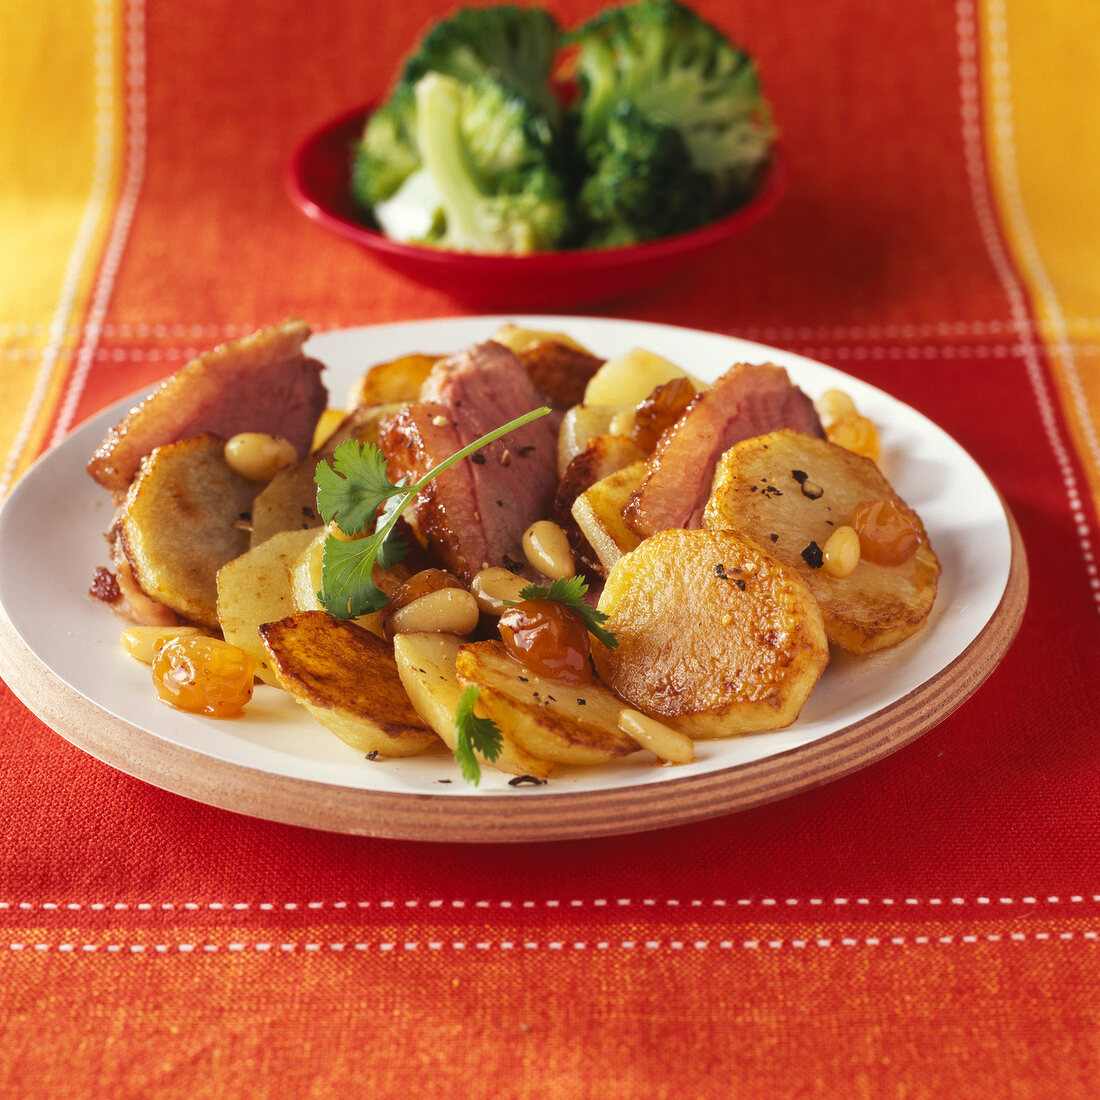 Sauteed potatoes with duck Magret ,raisins and pine nuts